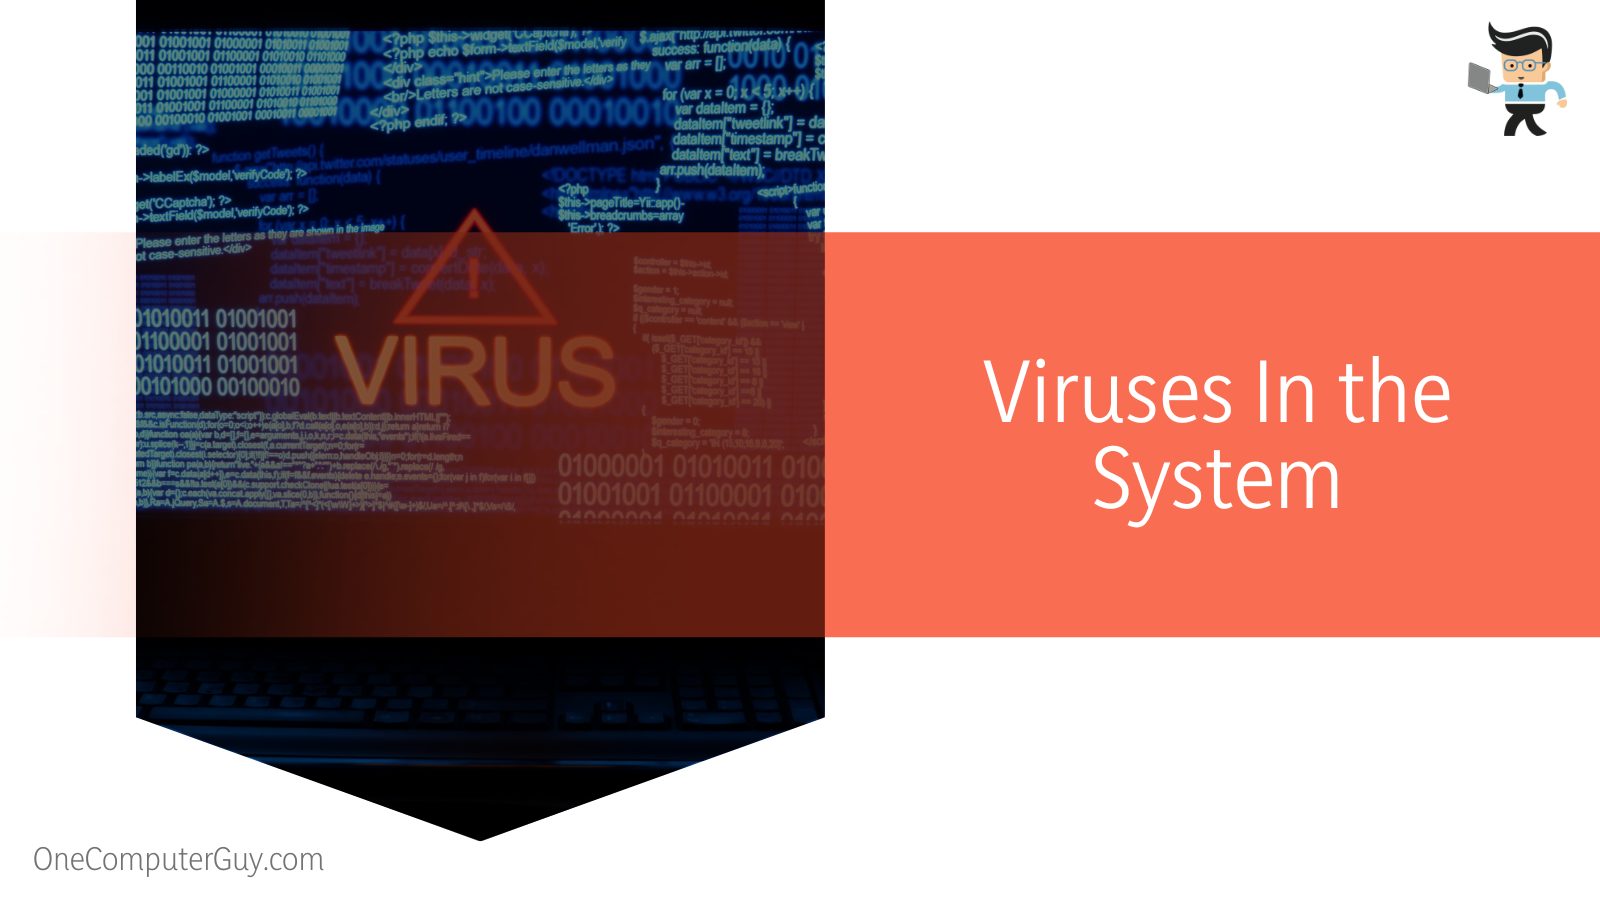 Viruses In the System